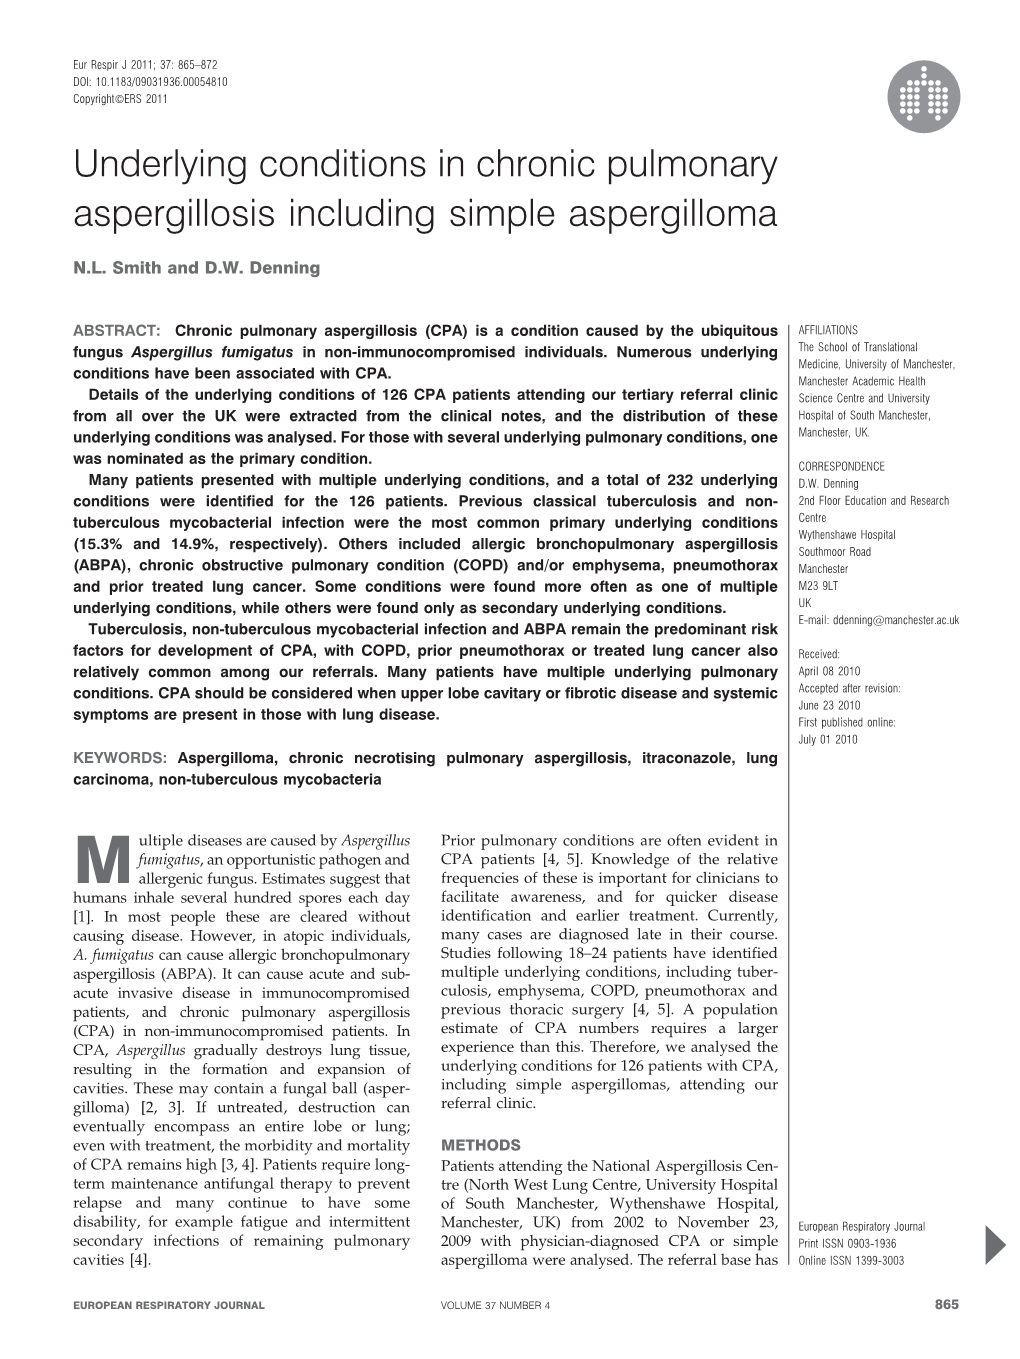 Underlying Conditions in Chronic Pulmonary Aspergillosis Including Simple Aspergilloma